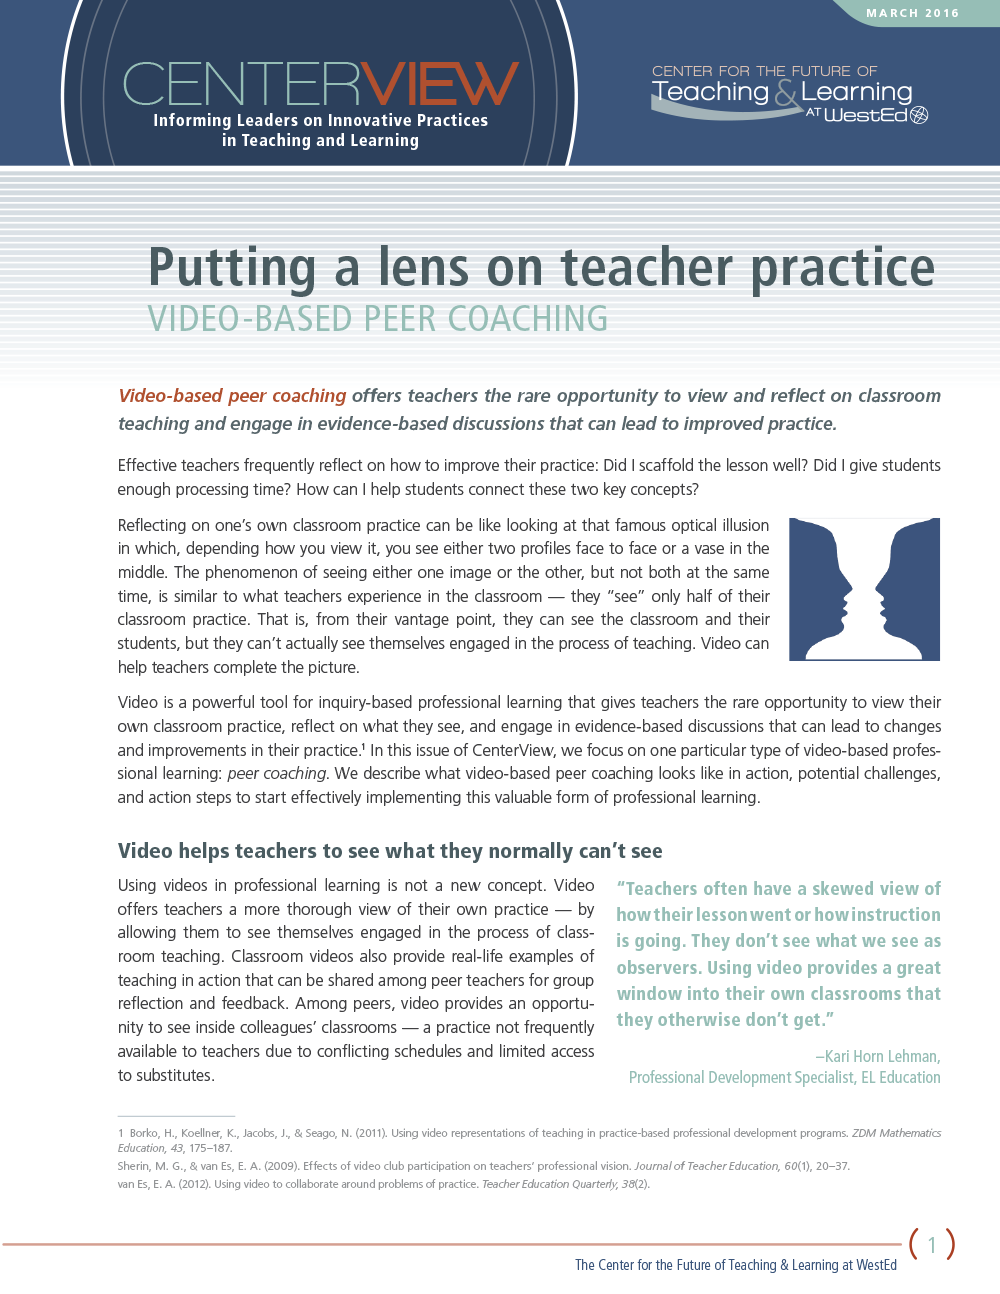 CenterView: Putting a Lens on Teacher Practice: Video-Based Peer Coaching